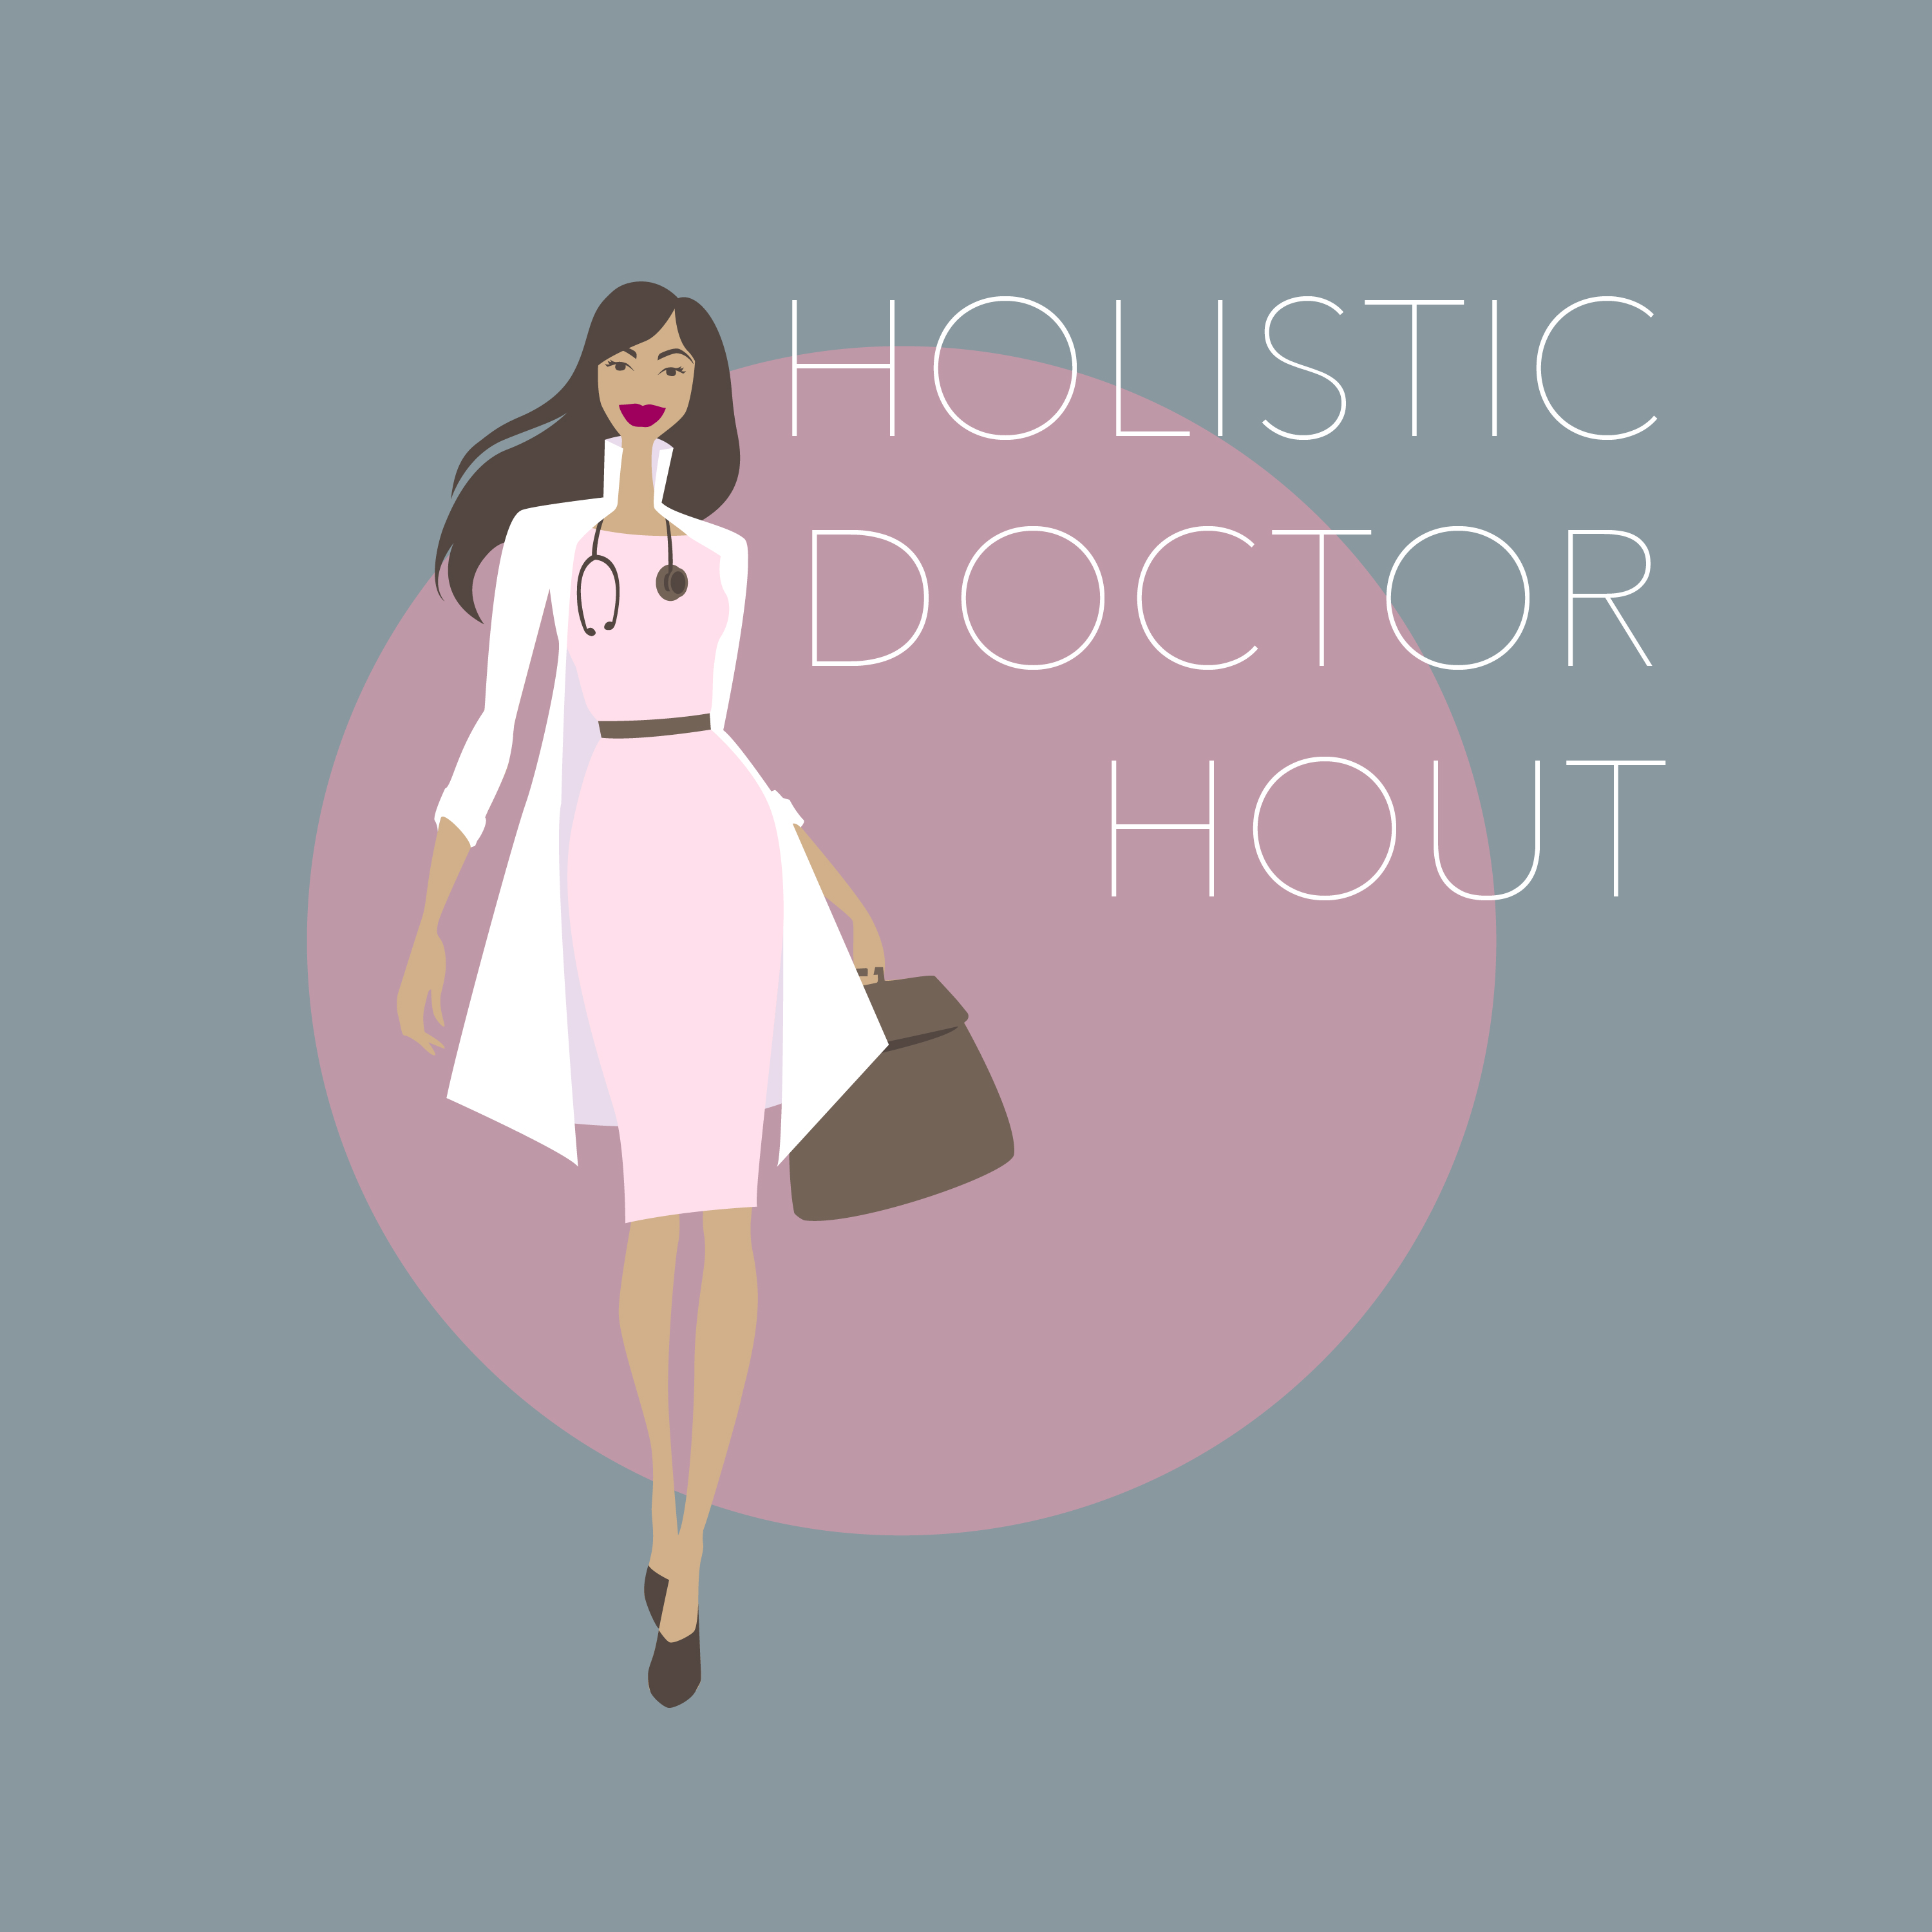 Holistic Doctor Hout